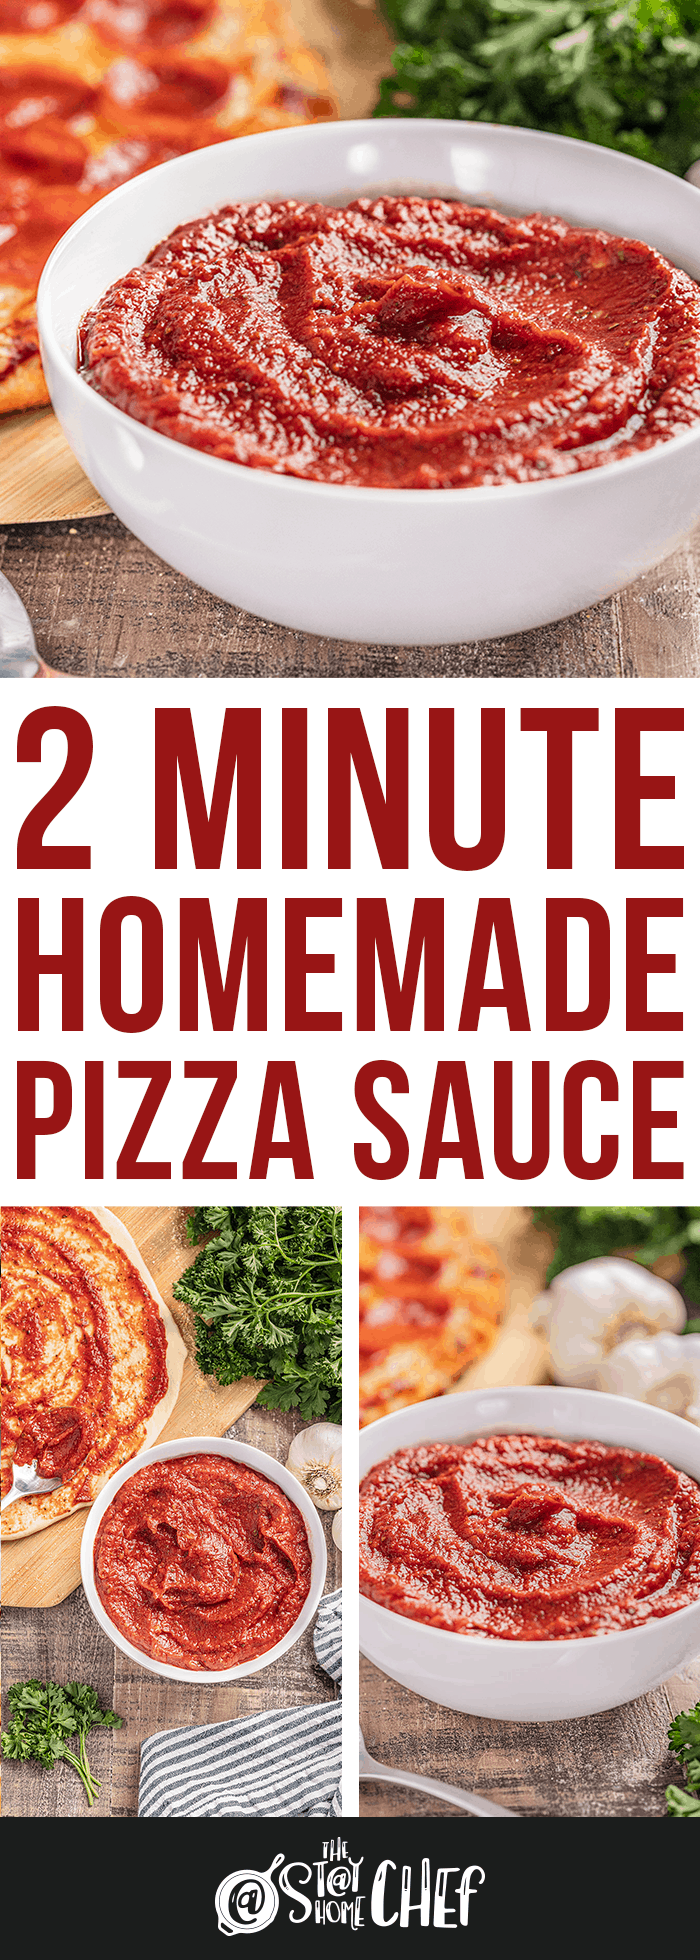 2 Minute Pizza Sauce